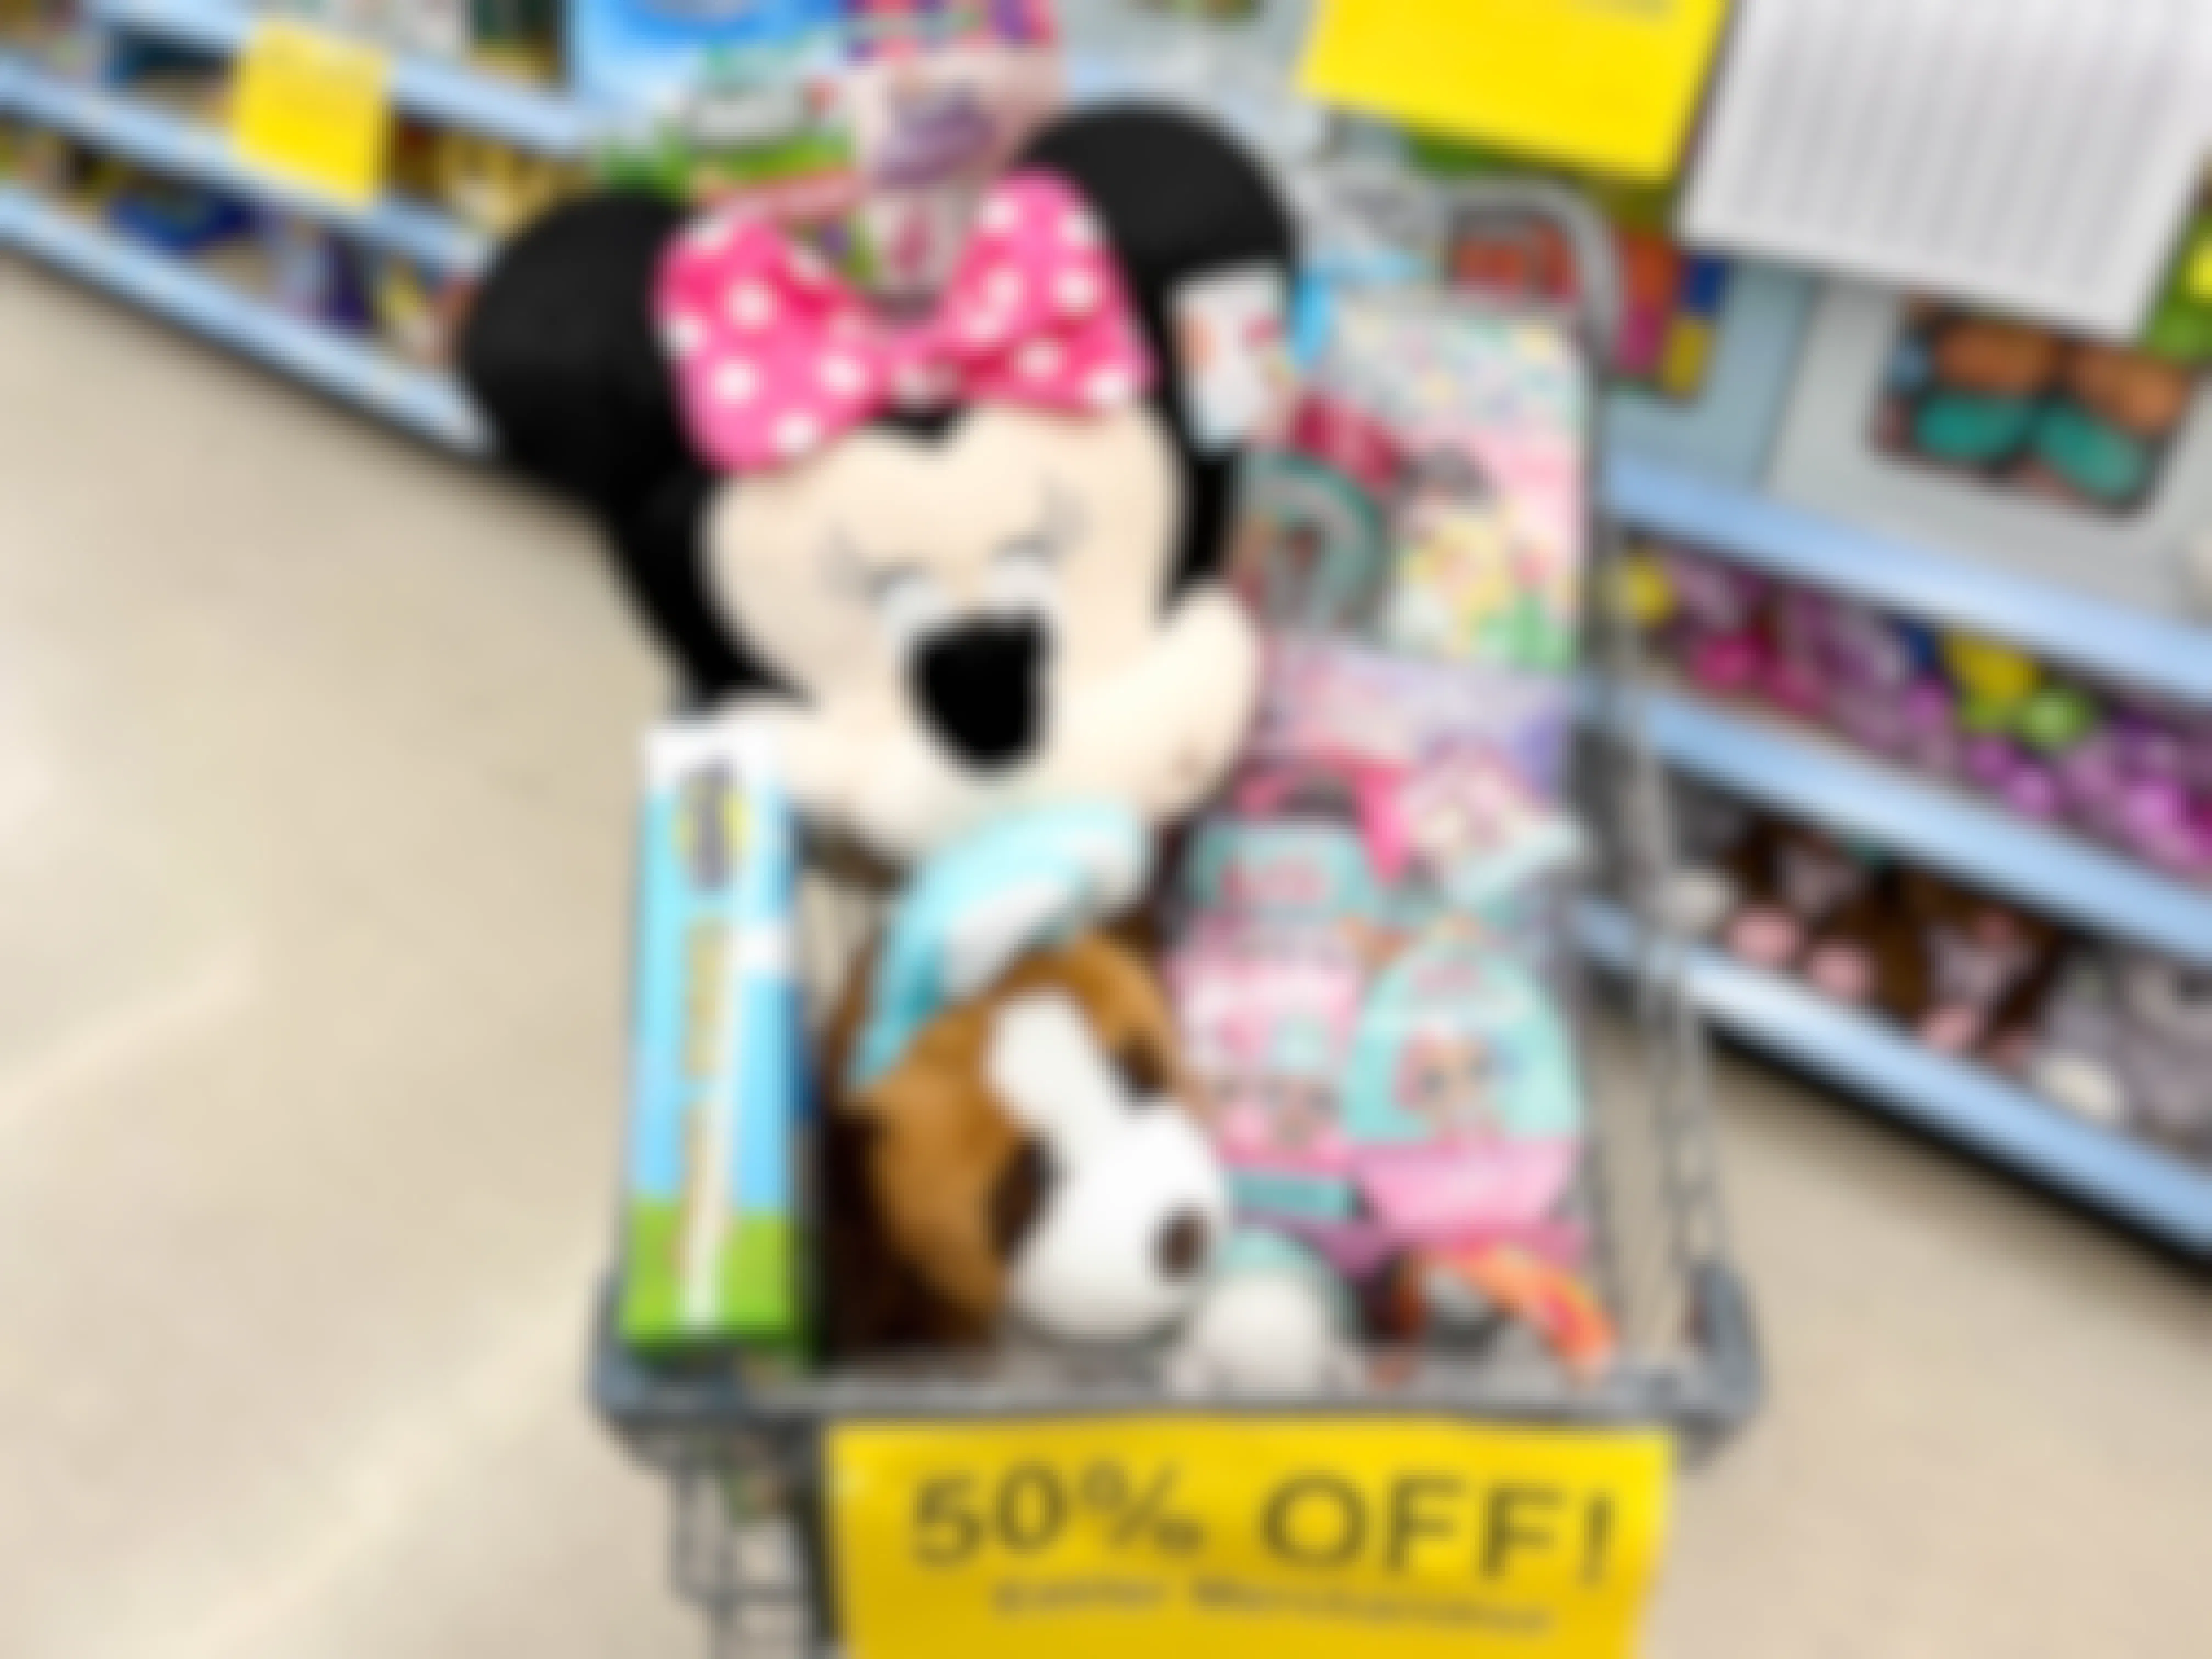 easter holiday clearance items in a Walgreens basket marked as 50% off